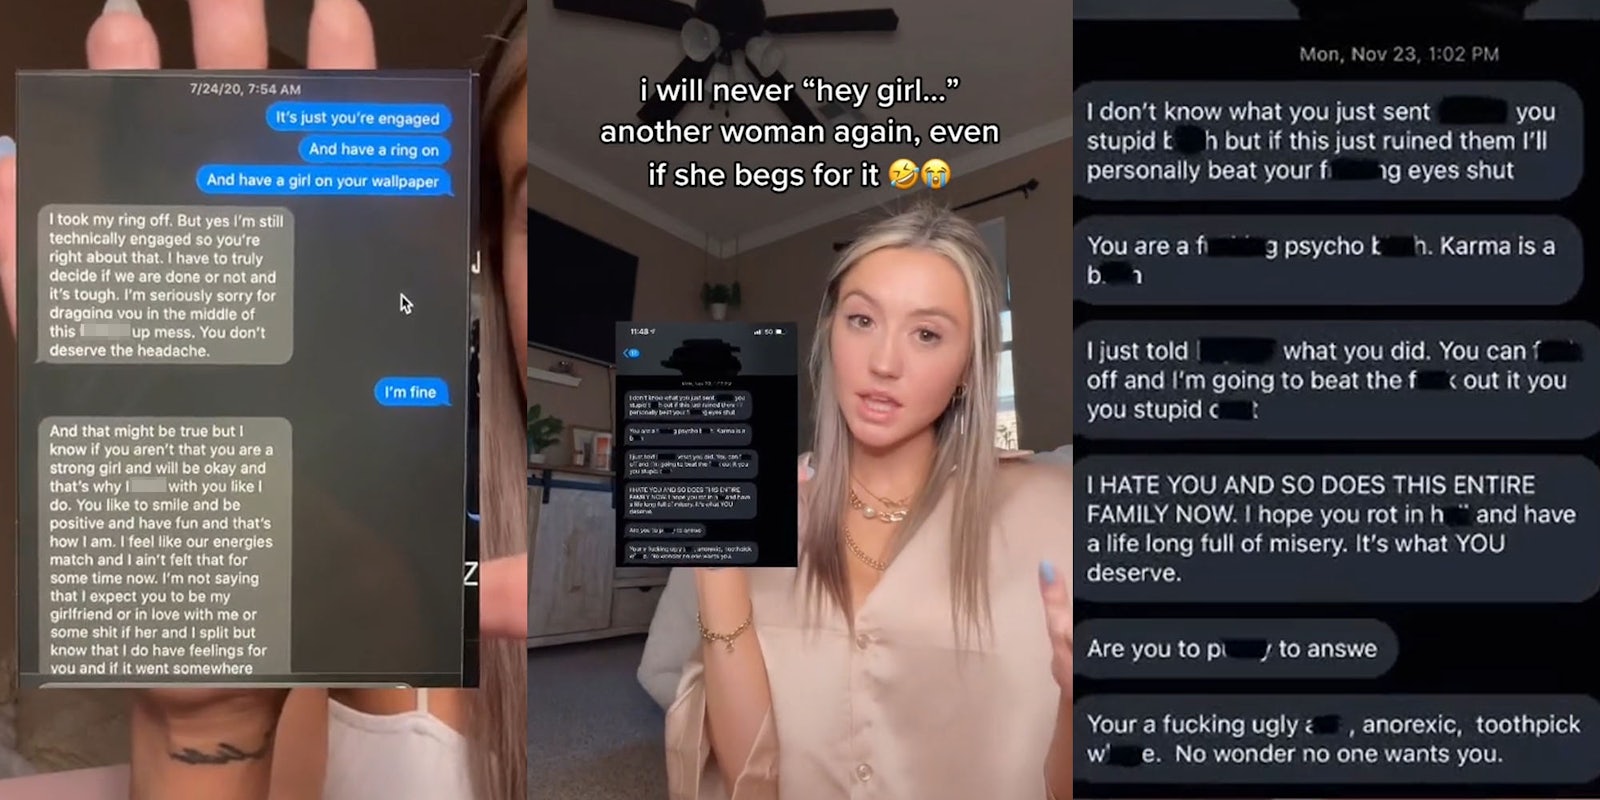 Woman holding text messages to screen with man who is engaged and he wants to cheat on his fiancé with her (l) Woman holding other messages caption 'i will never 'hey girl...' another woman again, even if she begs for it' (c) Up close screenshots of her messages with the man 's mom (r)